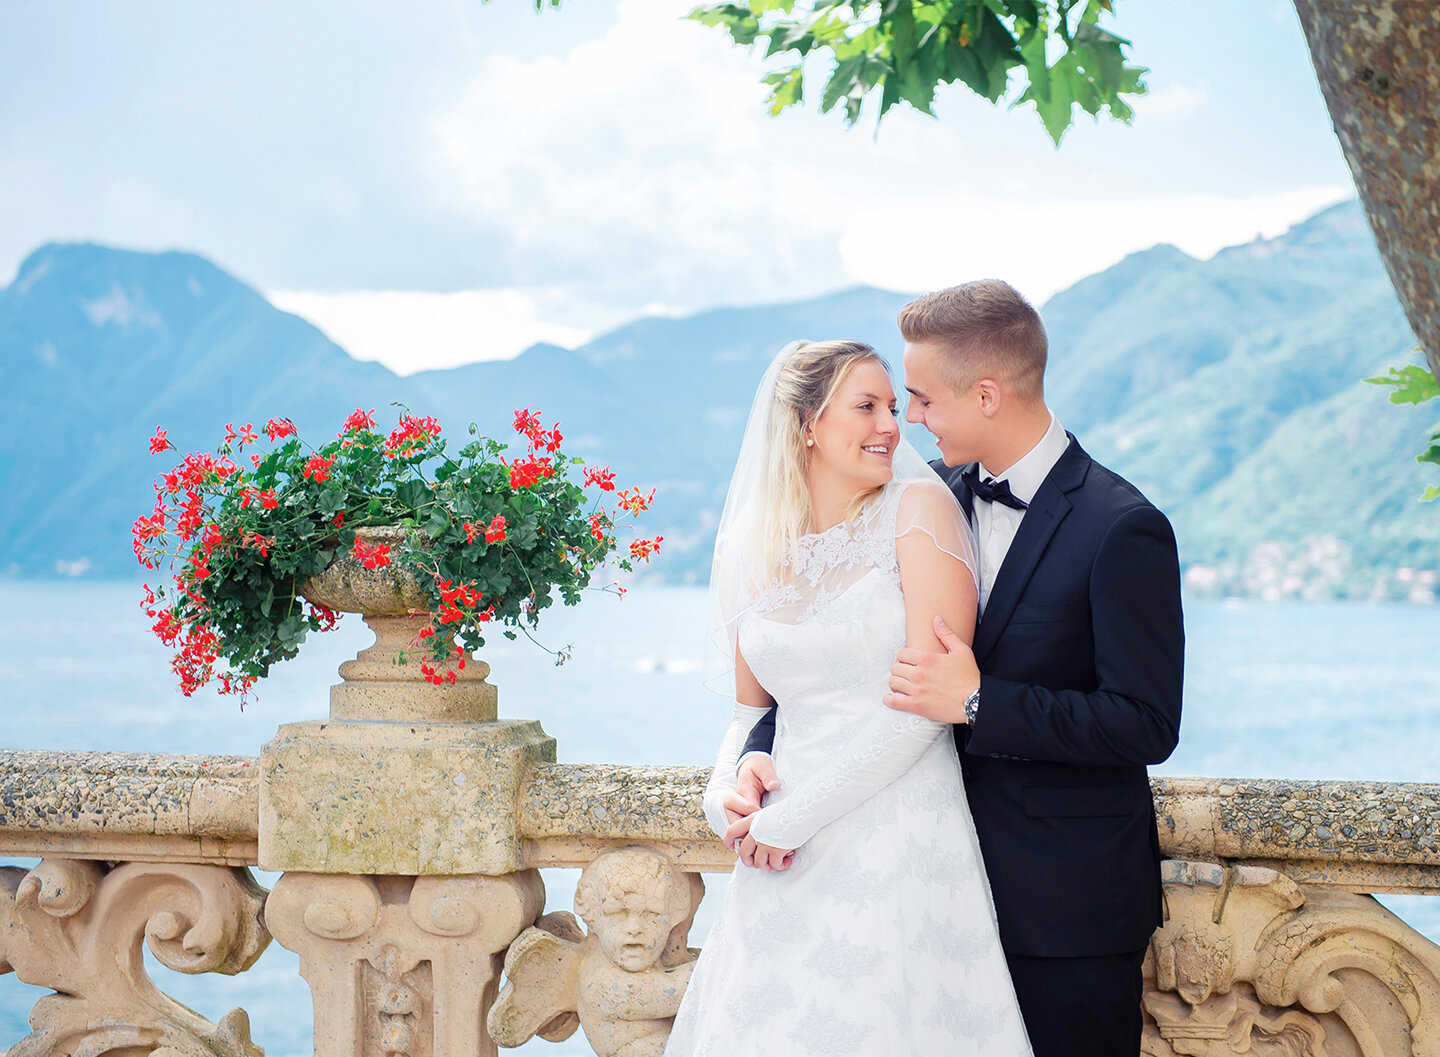 Bride and groom on the villa's terrace